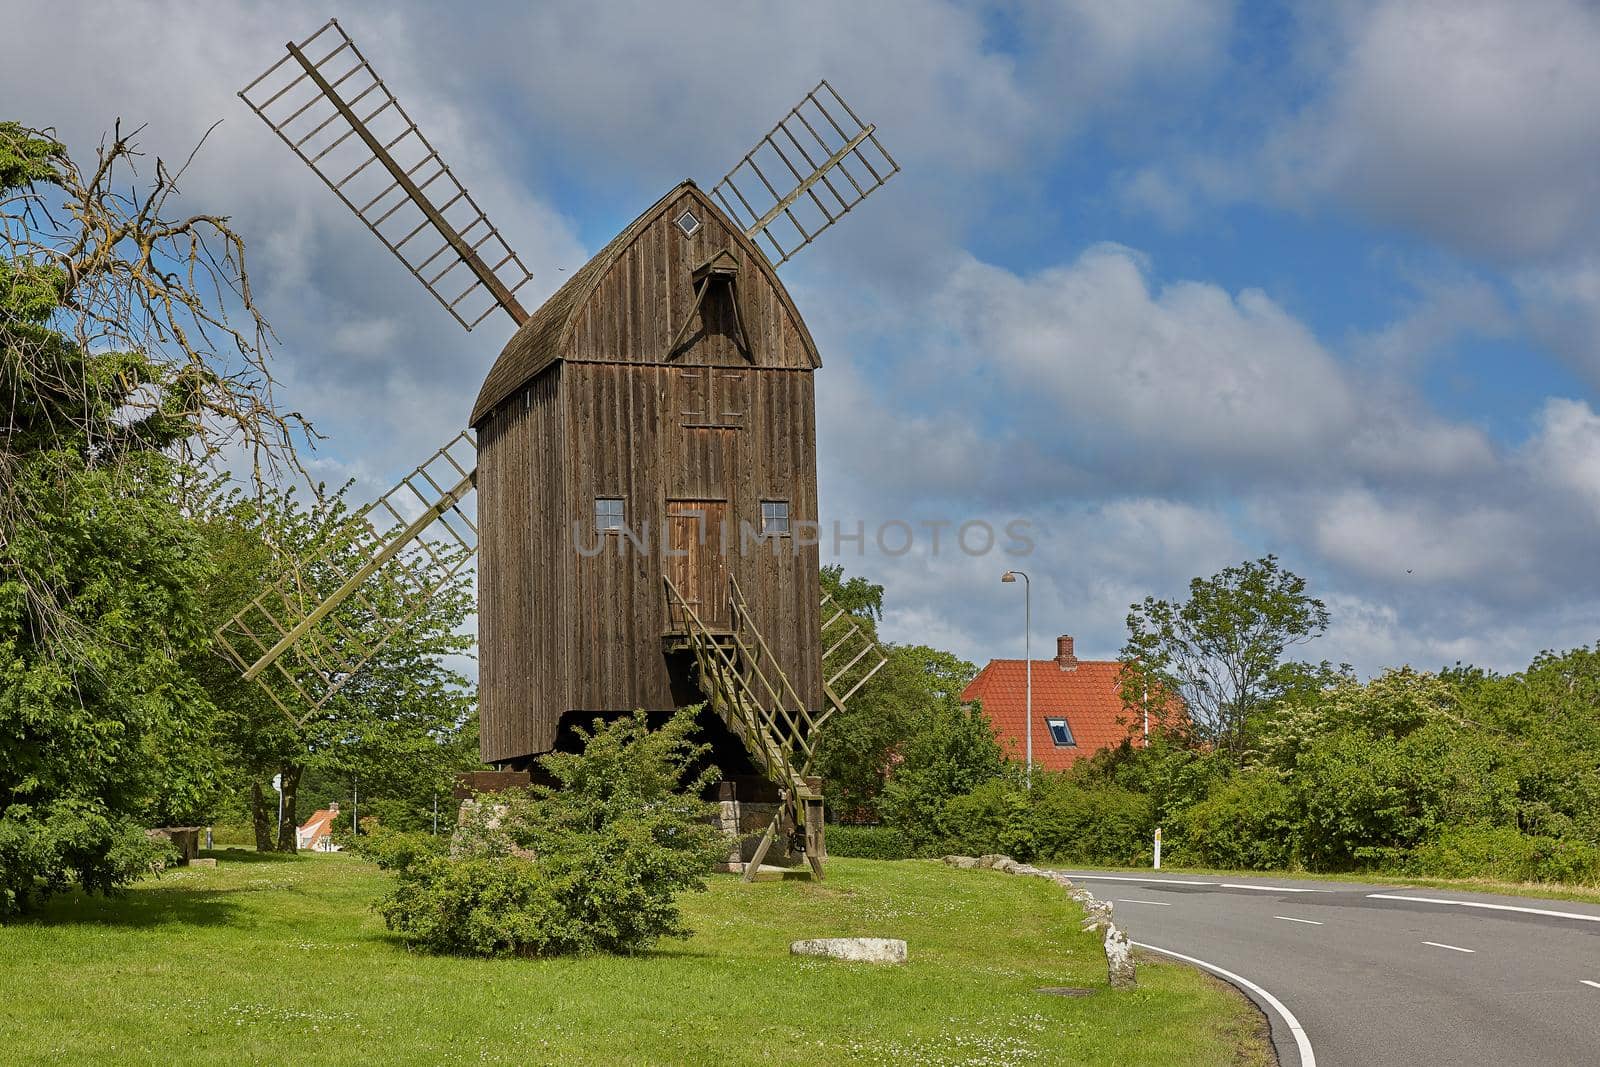 Timbered post mill built in 1629 - the oldest preserved windmill in Denmark, Svaneke, Bornholm island.